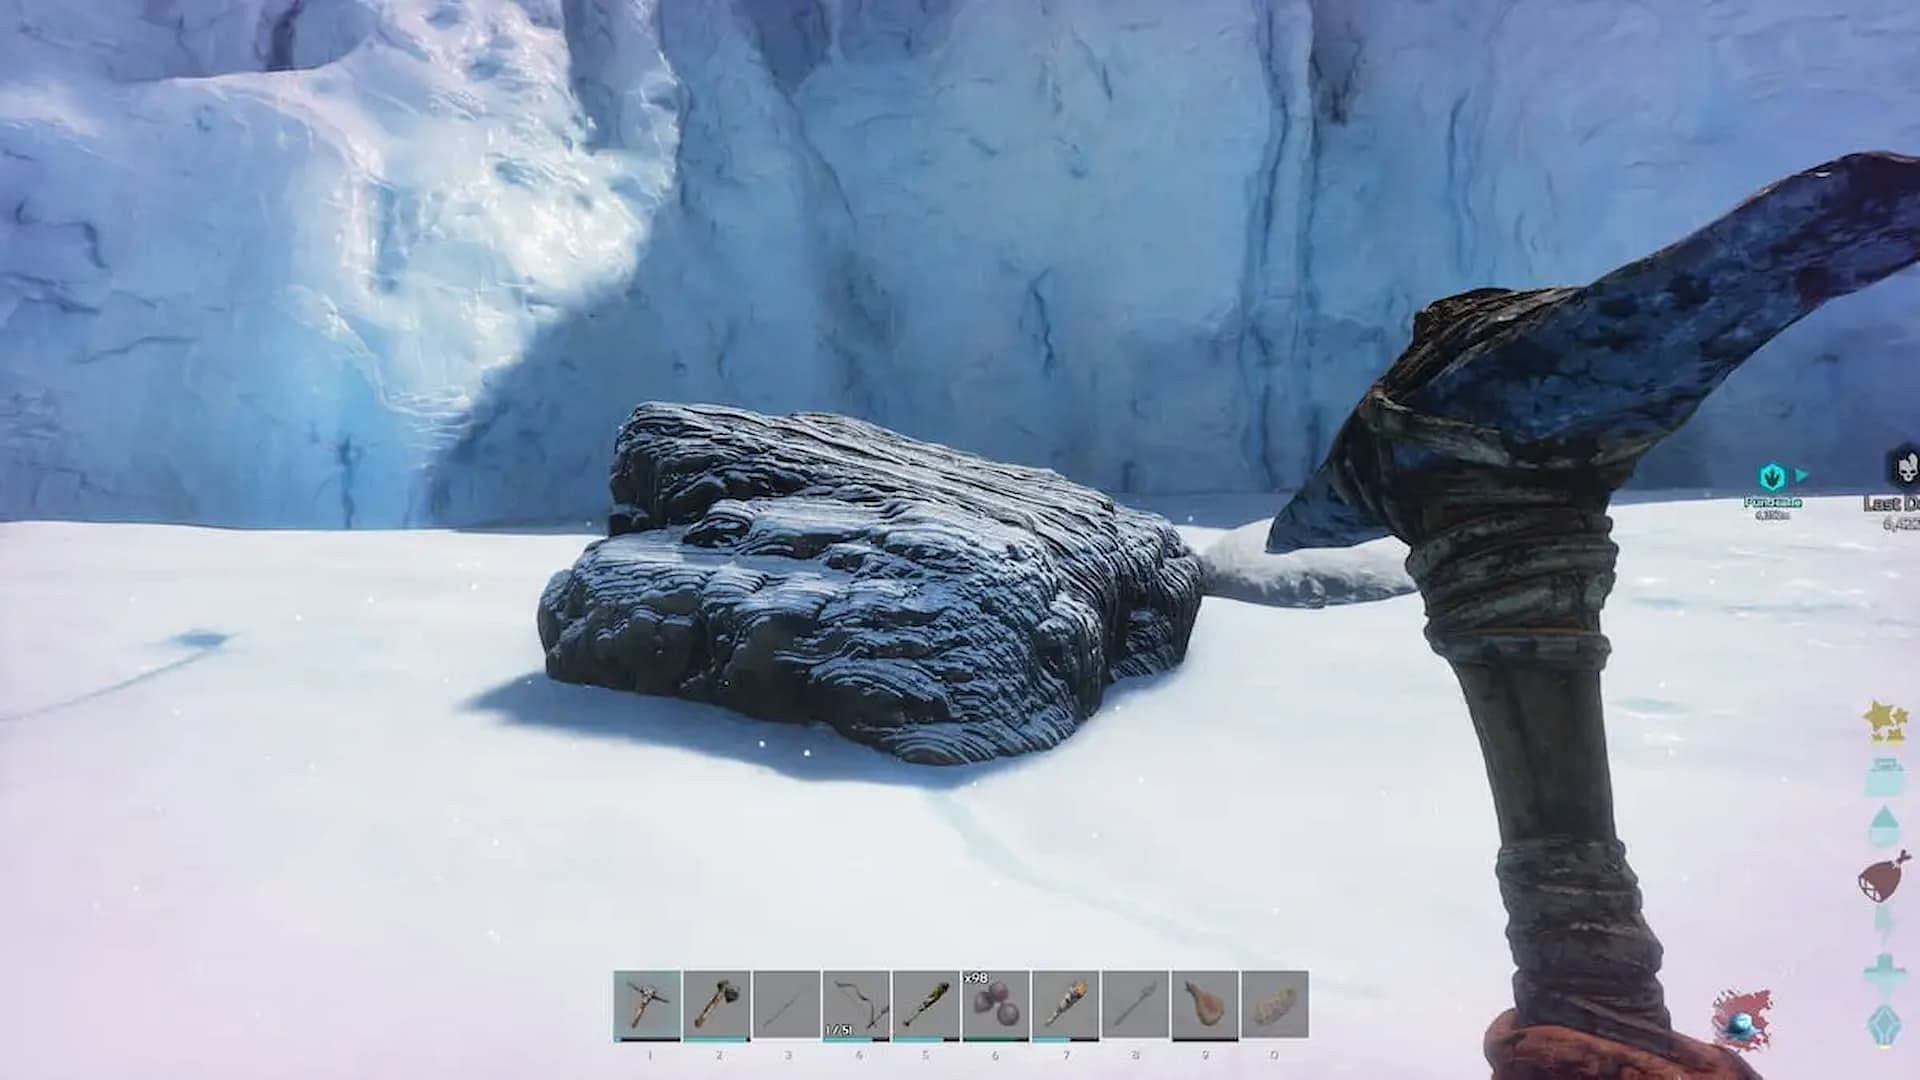 Oil can be mined from dark stones in ARK Survival Ascended (Image via Studio Wildcard)